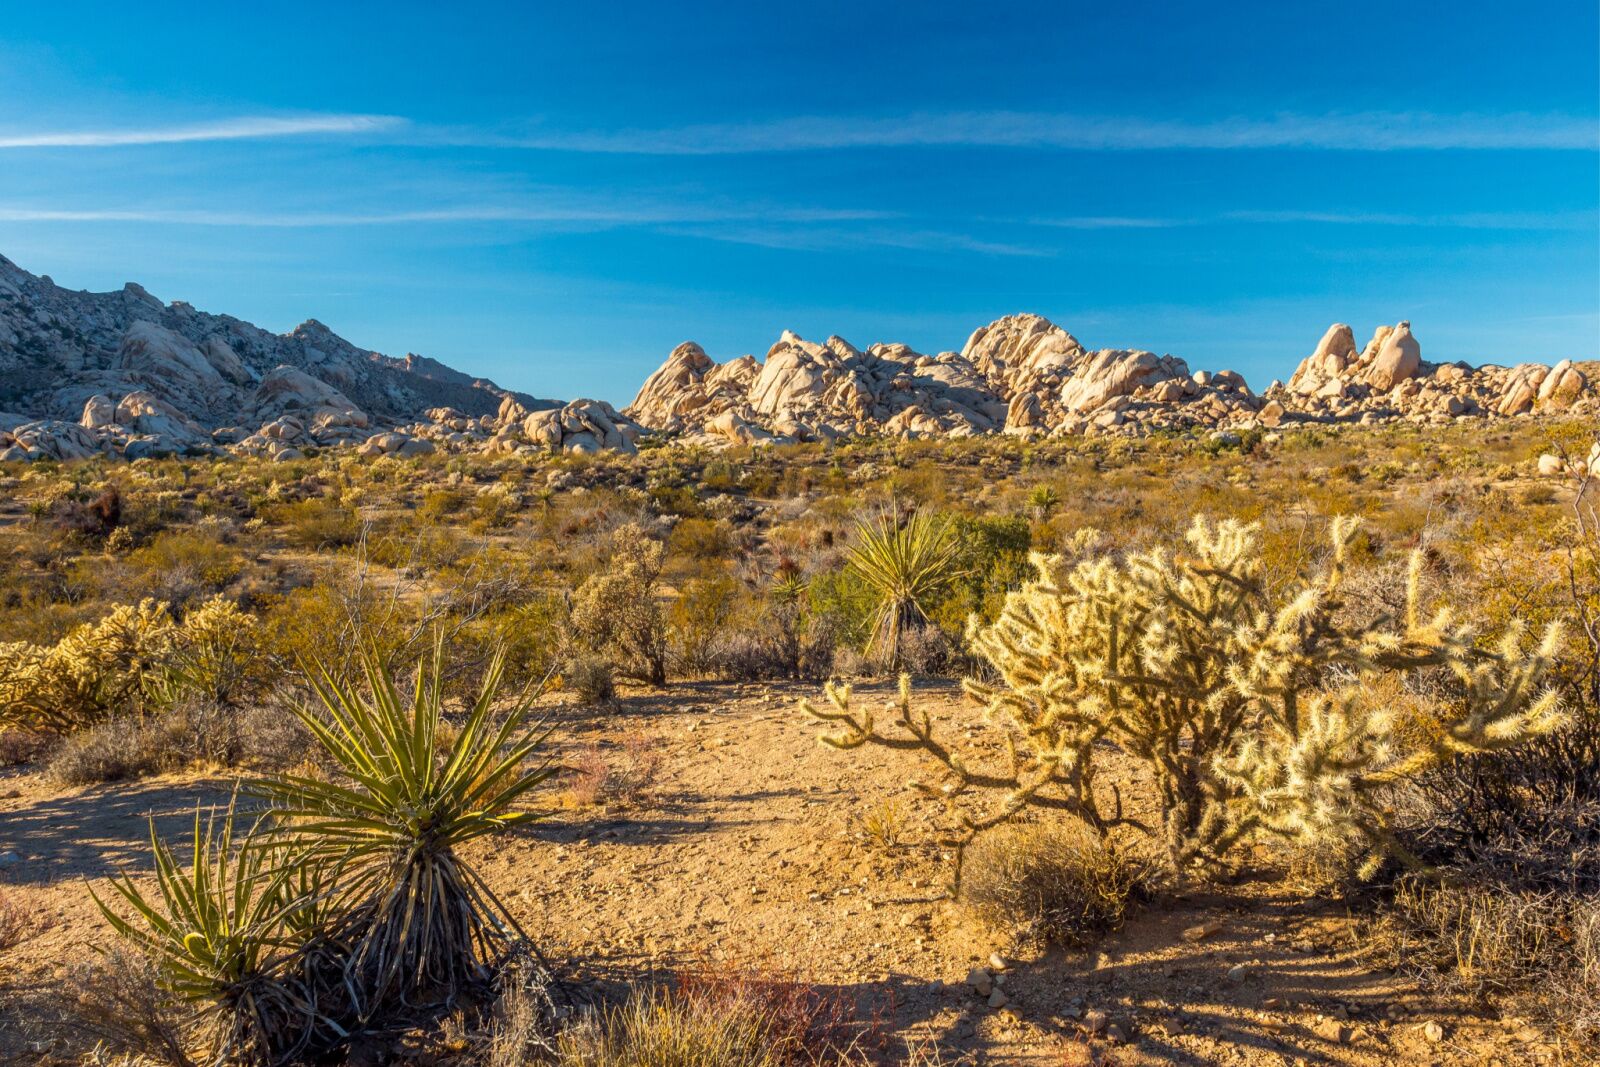 Landscape of the mojave desert preserve, near castle mountains, one of the new california national monuments